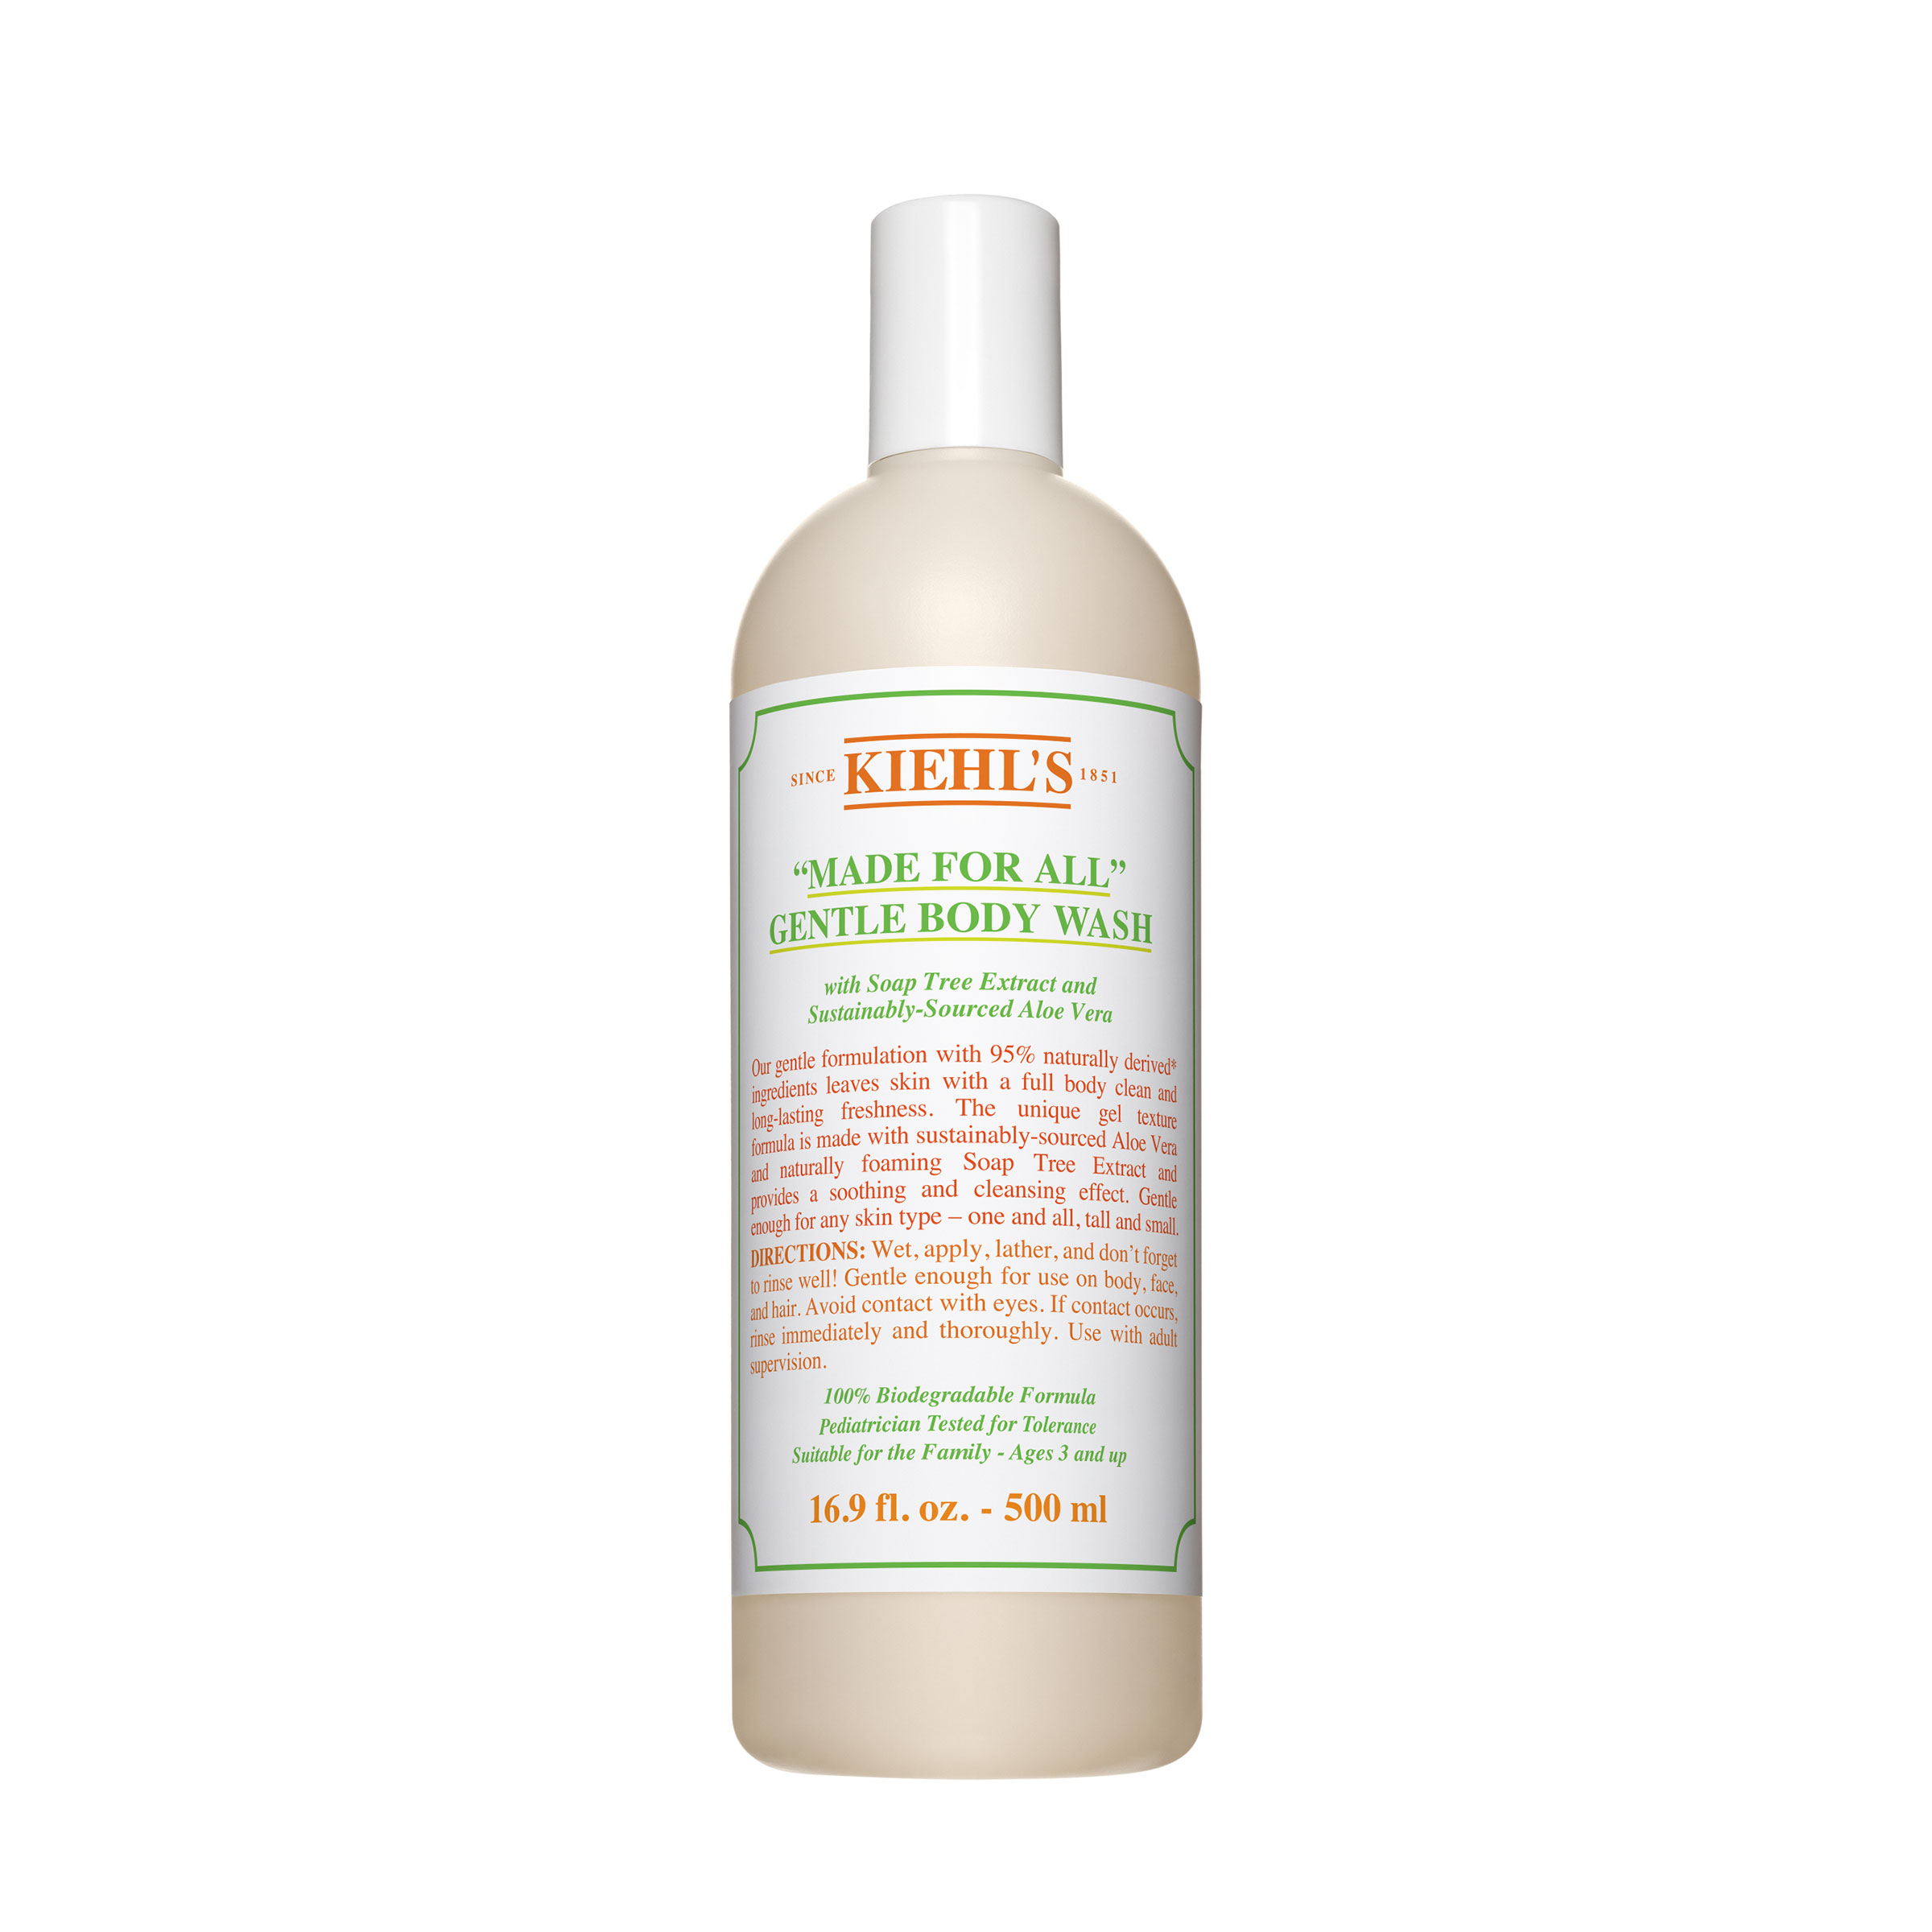 kiehl's made for all gentle body wash